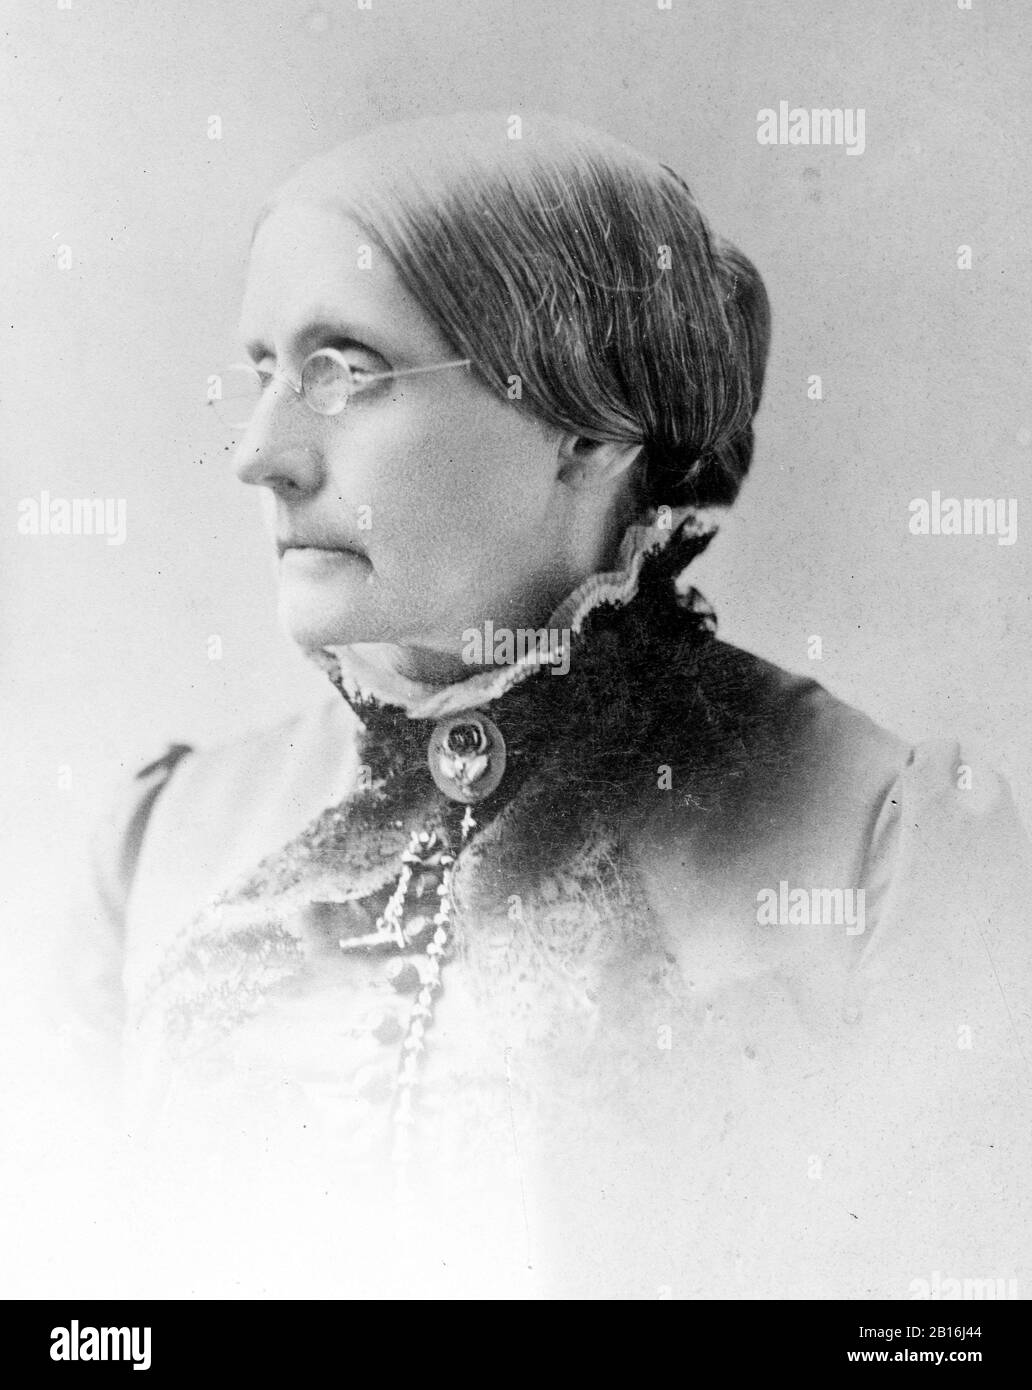 Susan B. Anthony, Susan B. Anthony (1820 – 1906) American social reformer and women's rights activist who played a pivotal role in the women's suffrage movement. Stock Photo